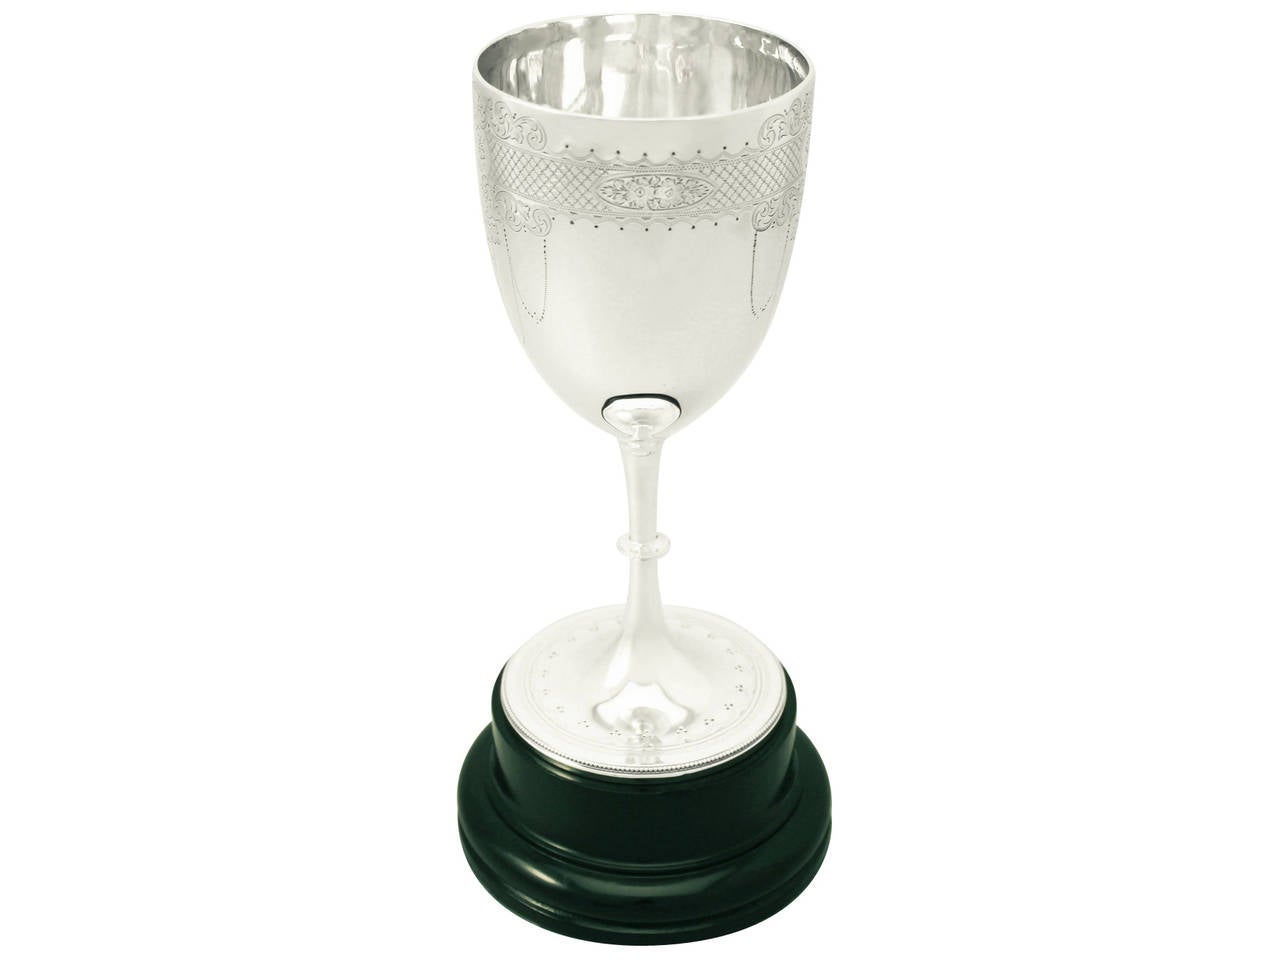 A fine antique Edwardian English sterling silver presentation cup; part of our cups and trophies collection

This fine antique Edwardian sterling silver presentation cup has a round bell shaped form onto a knopped stem and circular spreading